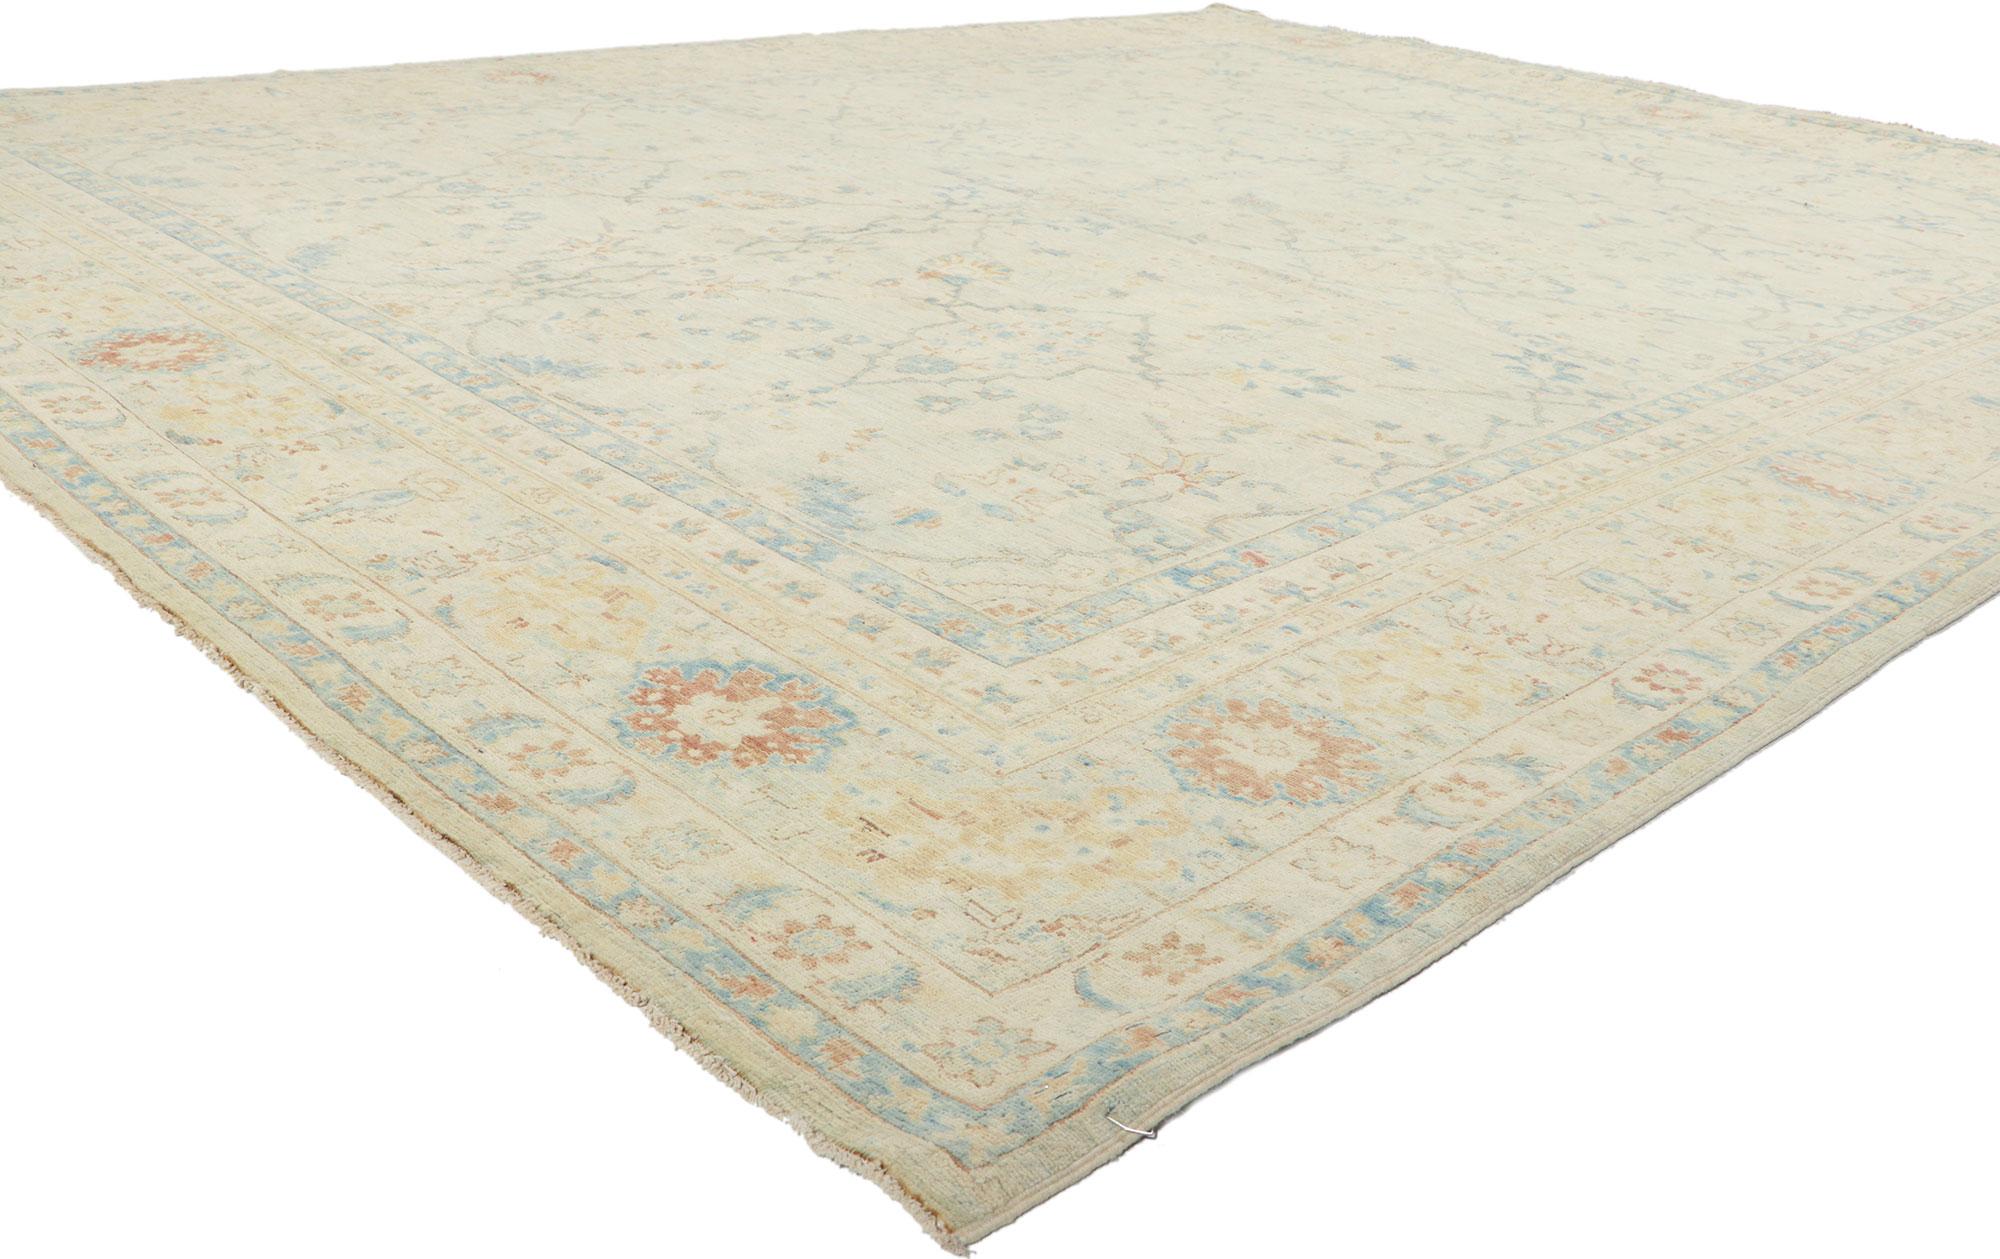 80945 New Contemporary Oushak Rug with Modern Style. Serene and sophisticated, this hand-knotted wool contemporary Oushak rug beautifully embodies a modern style. The composition features an all-over botanical pattern composed of amorphous organic